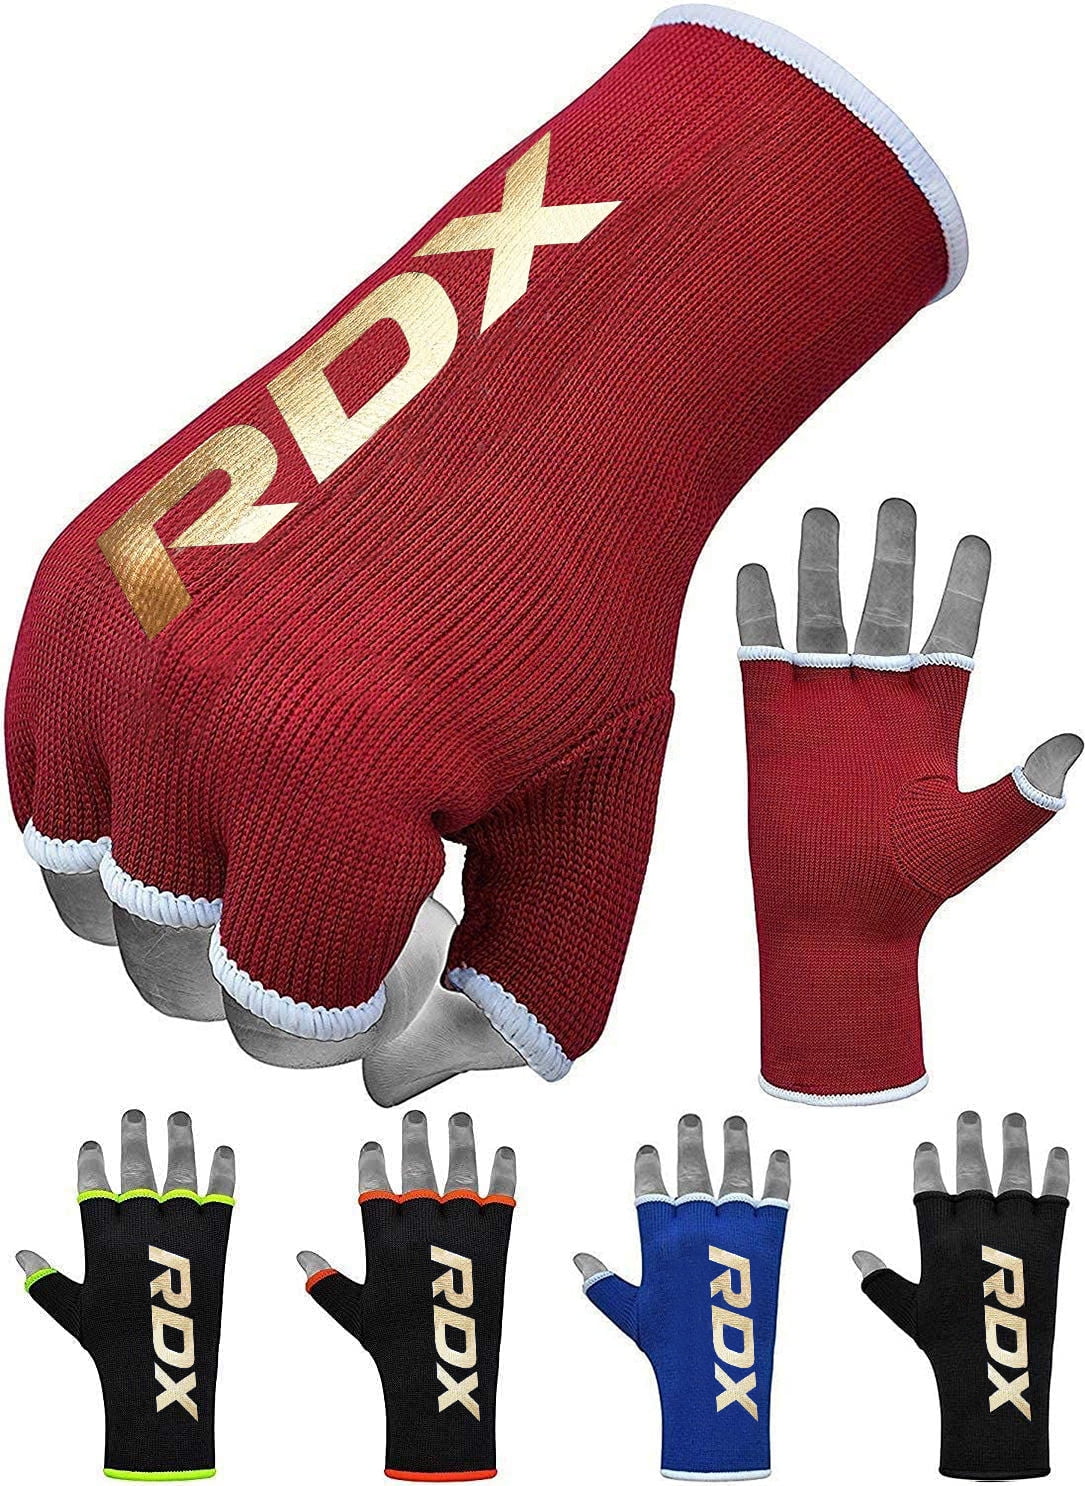 RDX Boxing With Pink Bandages Strap Gym Training Ladies Inner Hand Wraps Gloves 